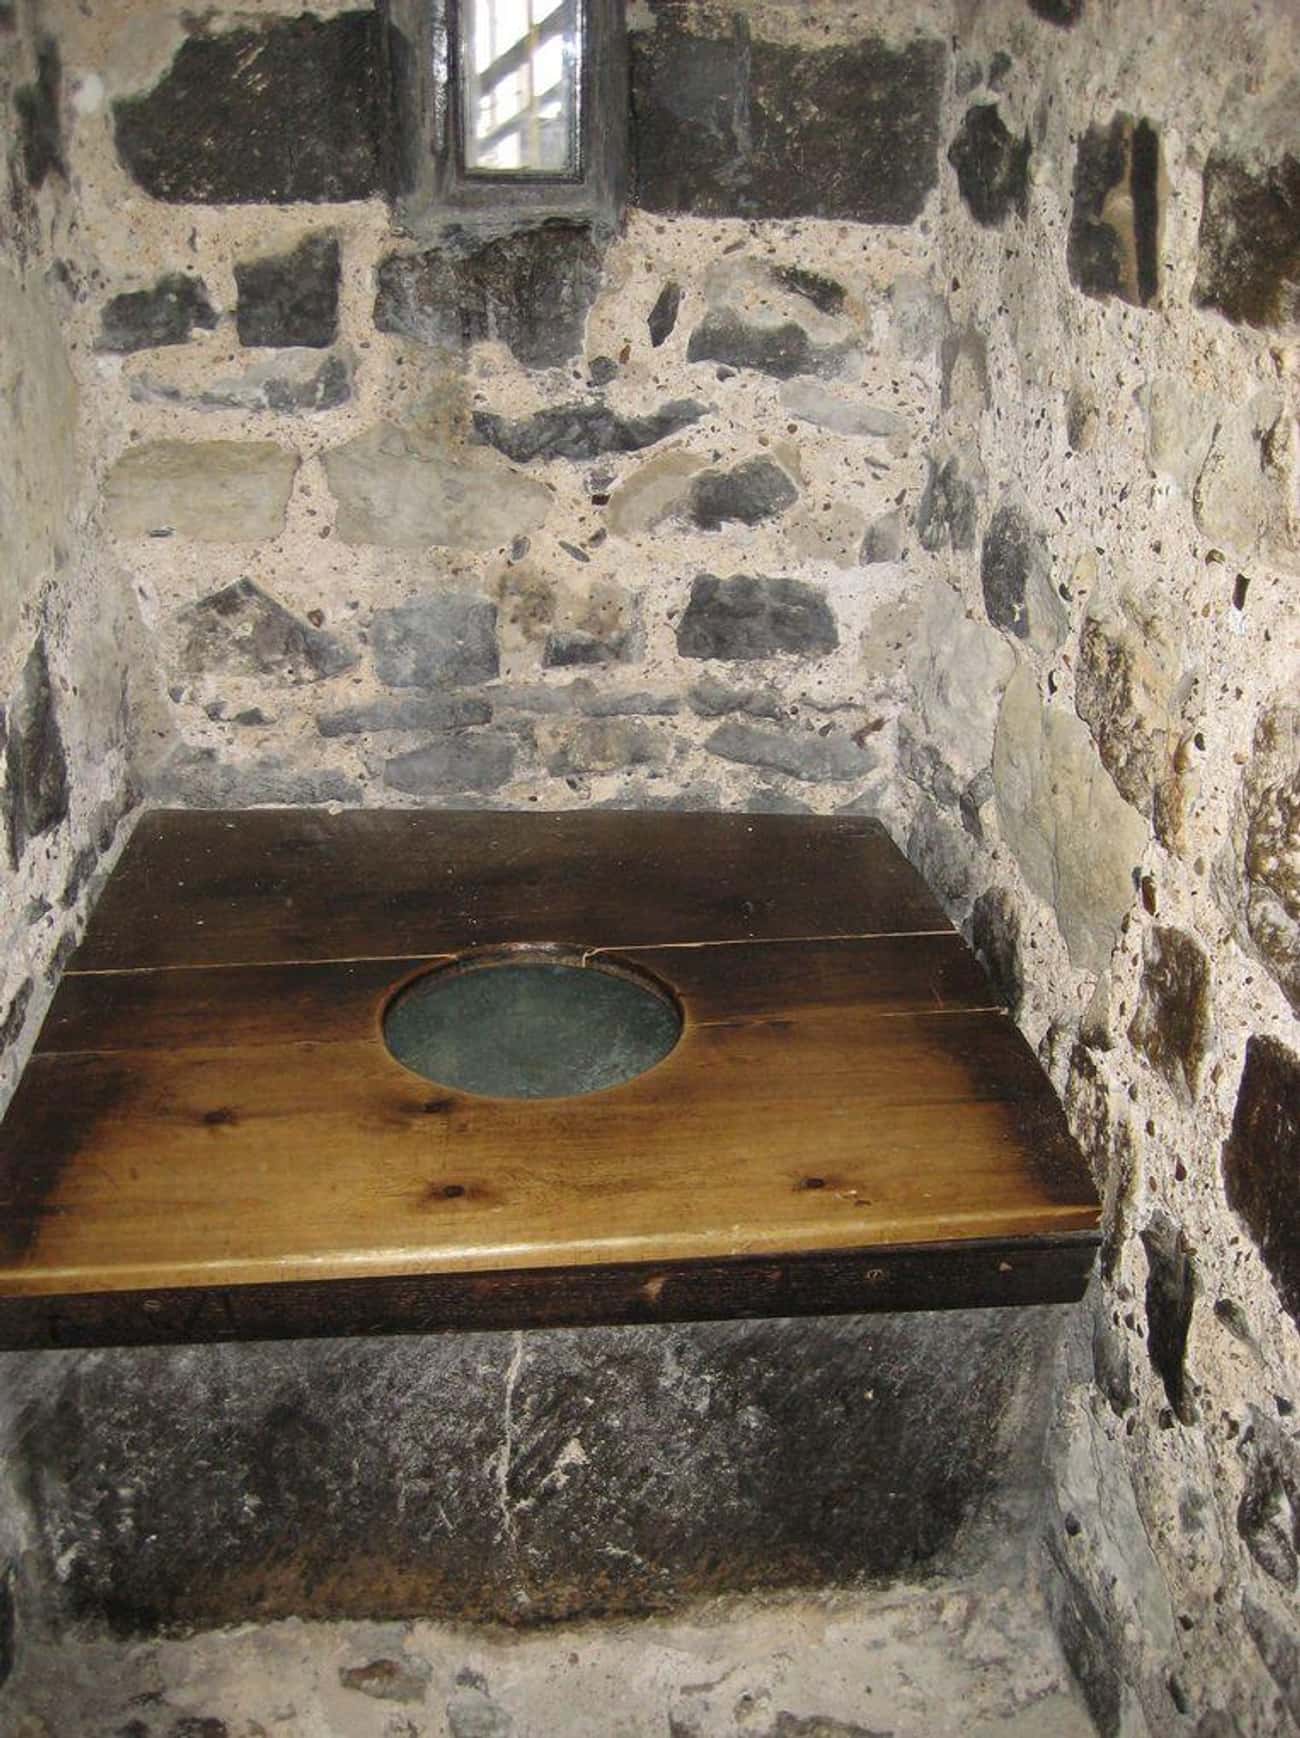 Toilets Were Often Just A Bench With A Hole In It